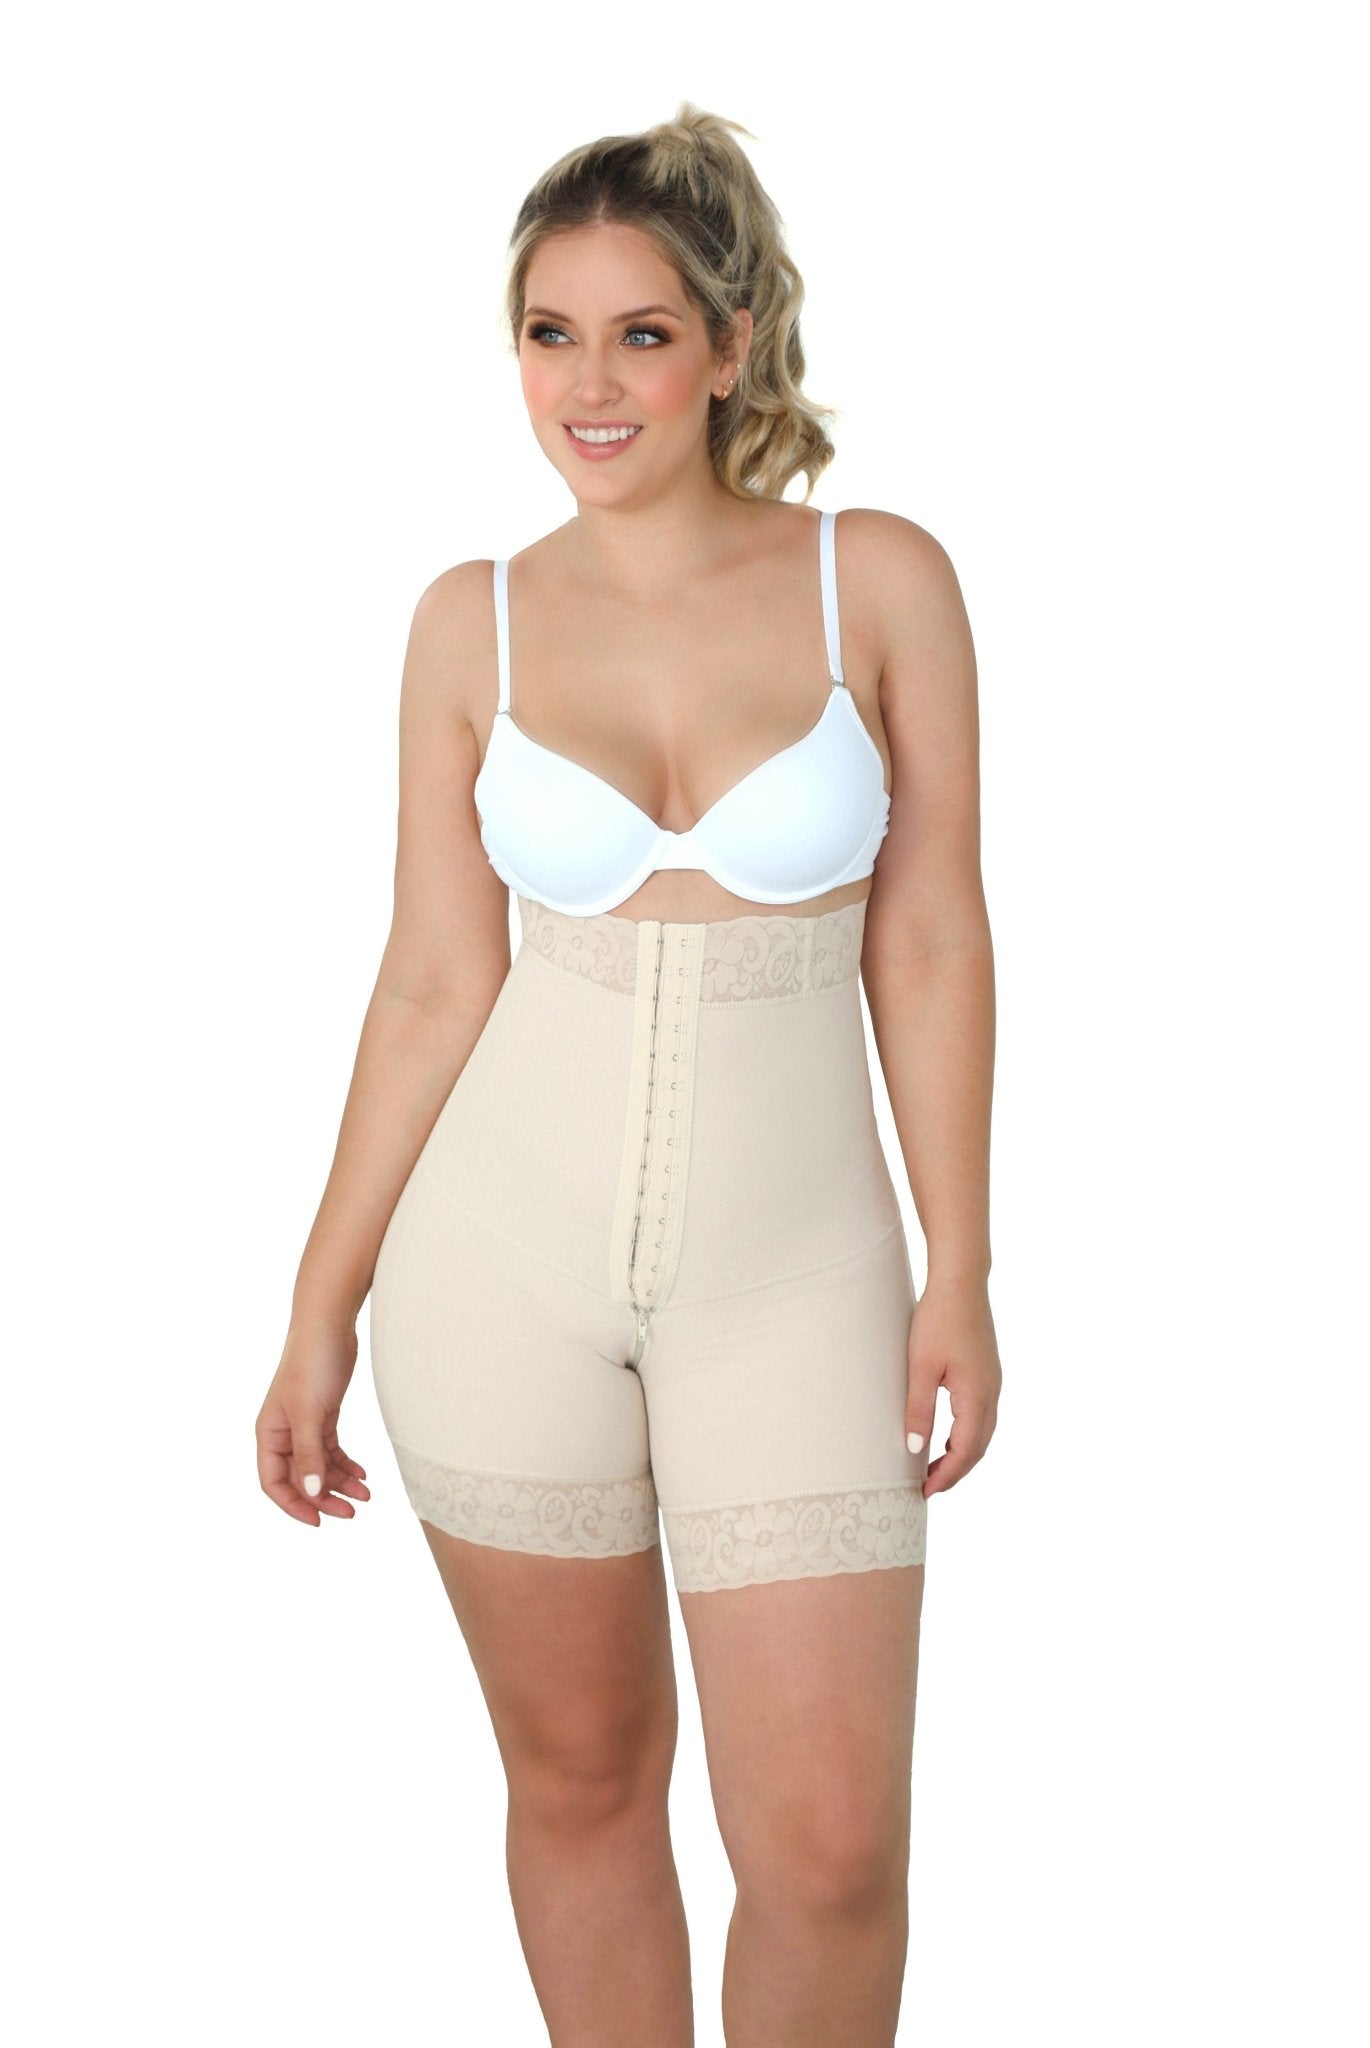 High quality Colombian girdles for all women